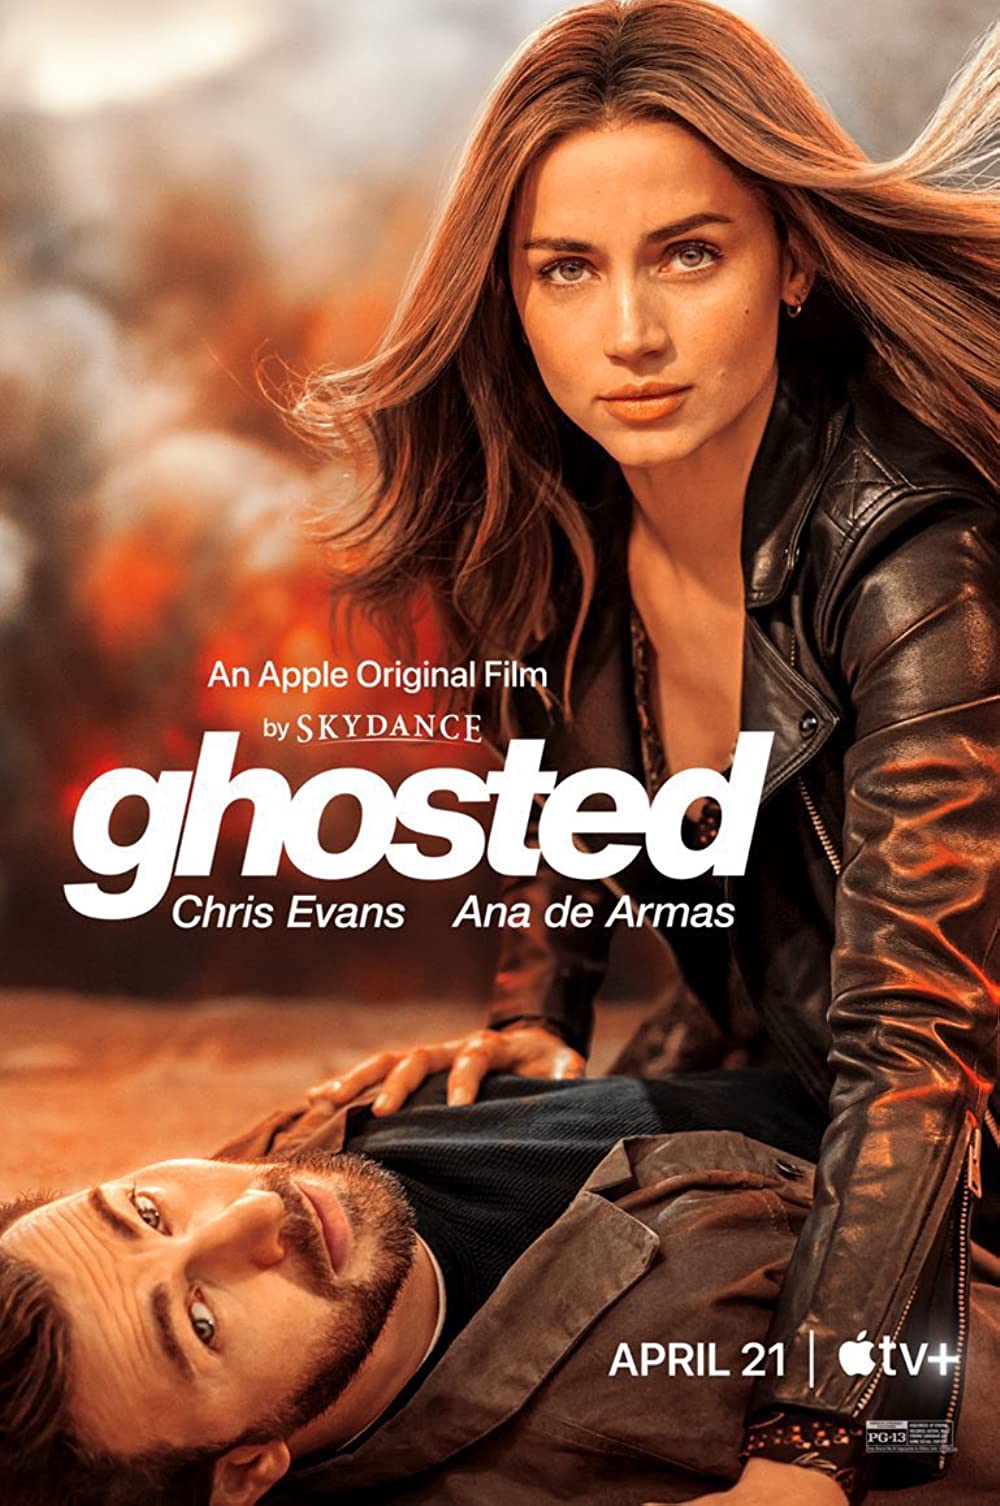 Ghosted movie poster